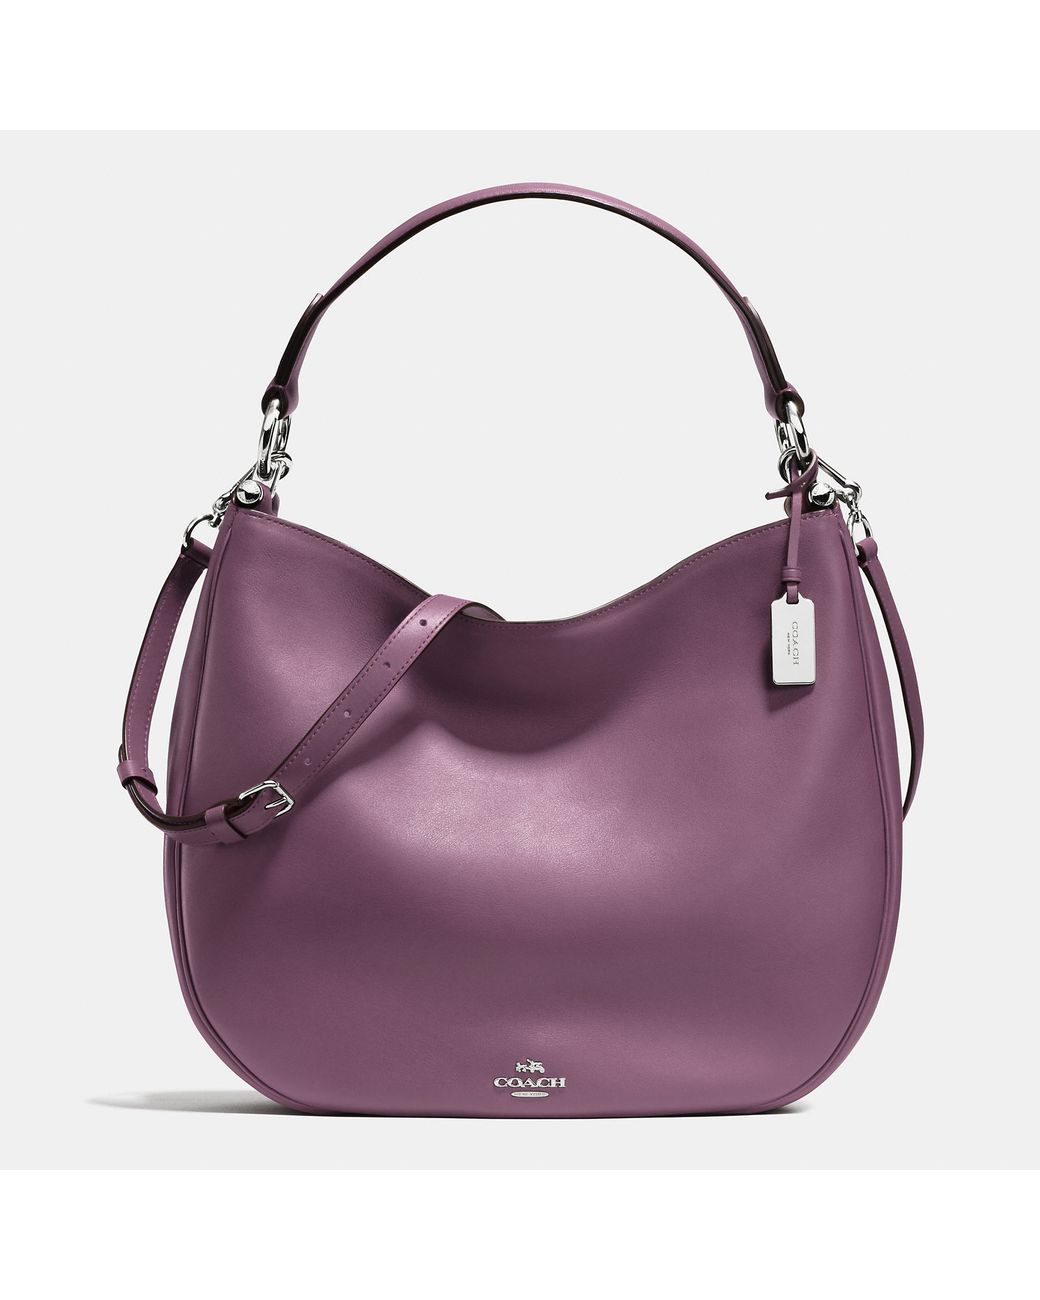 COACH Nomad Hobo In Glovetanned Leather in Purple | Lyst